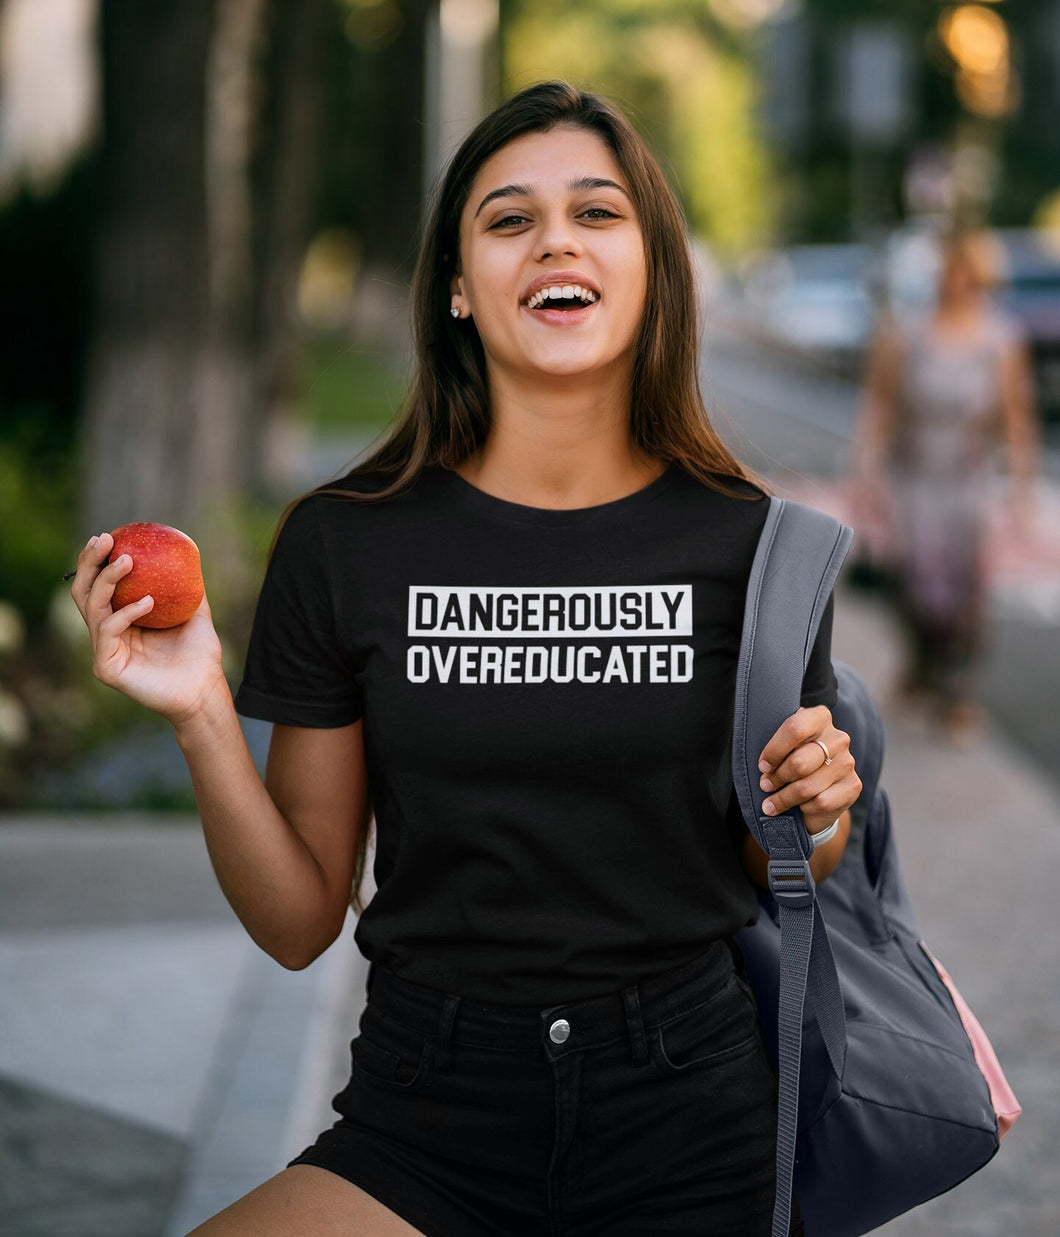 Dangerously Overeducated Shirt, PhD College Shirt, PhD Shirt, PhD Student Shirt